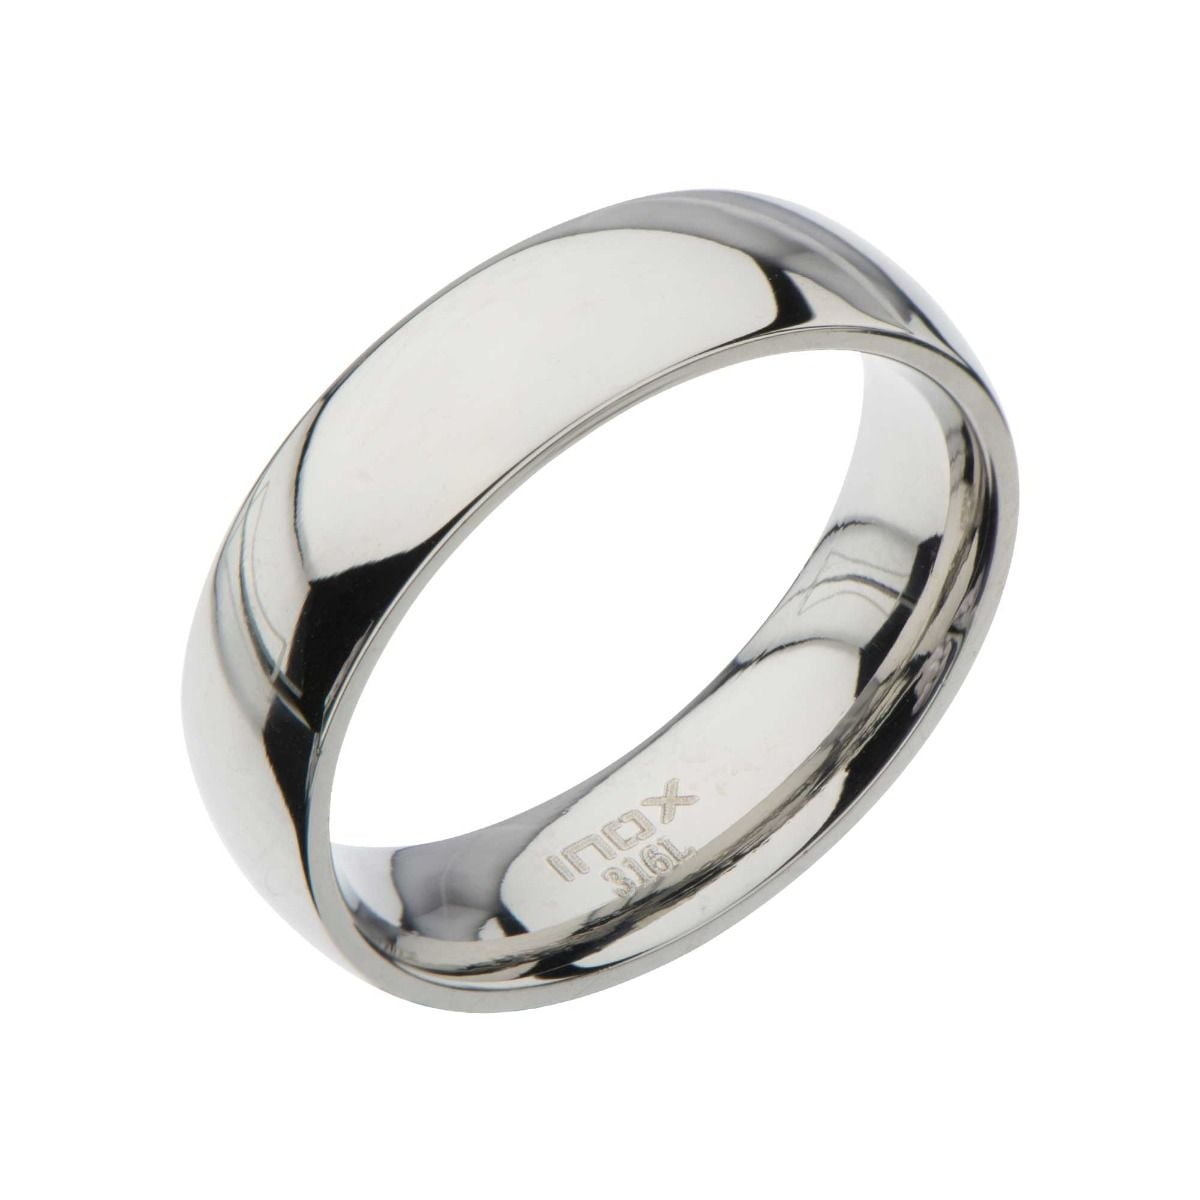 Stainless Steel Men's Antique Style Rounded Square Band Ring Size 9-12 